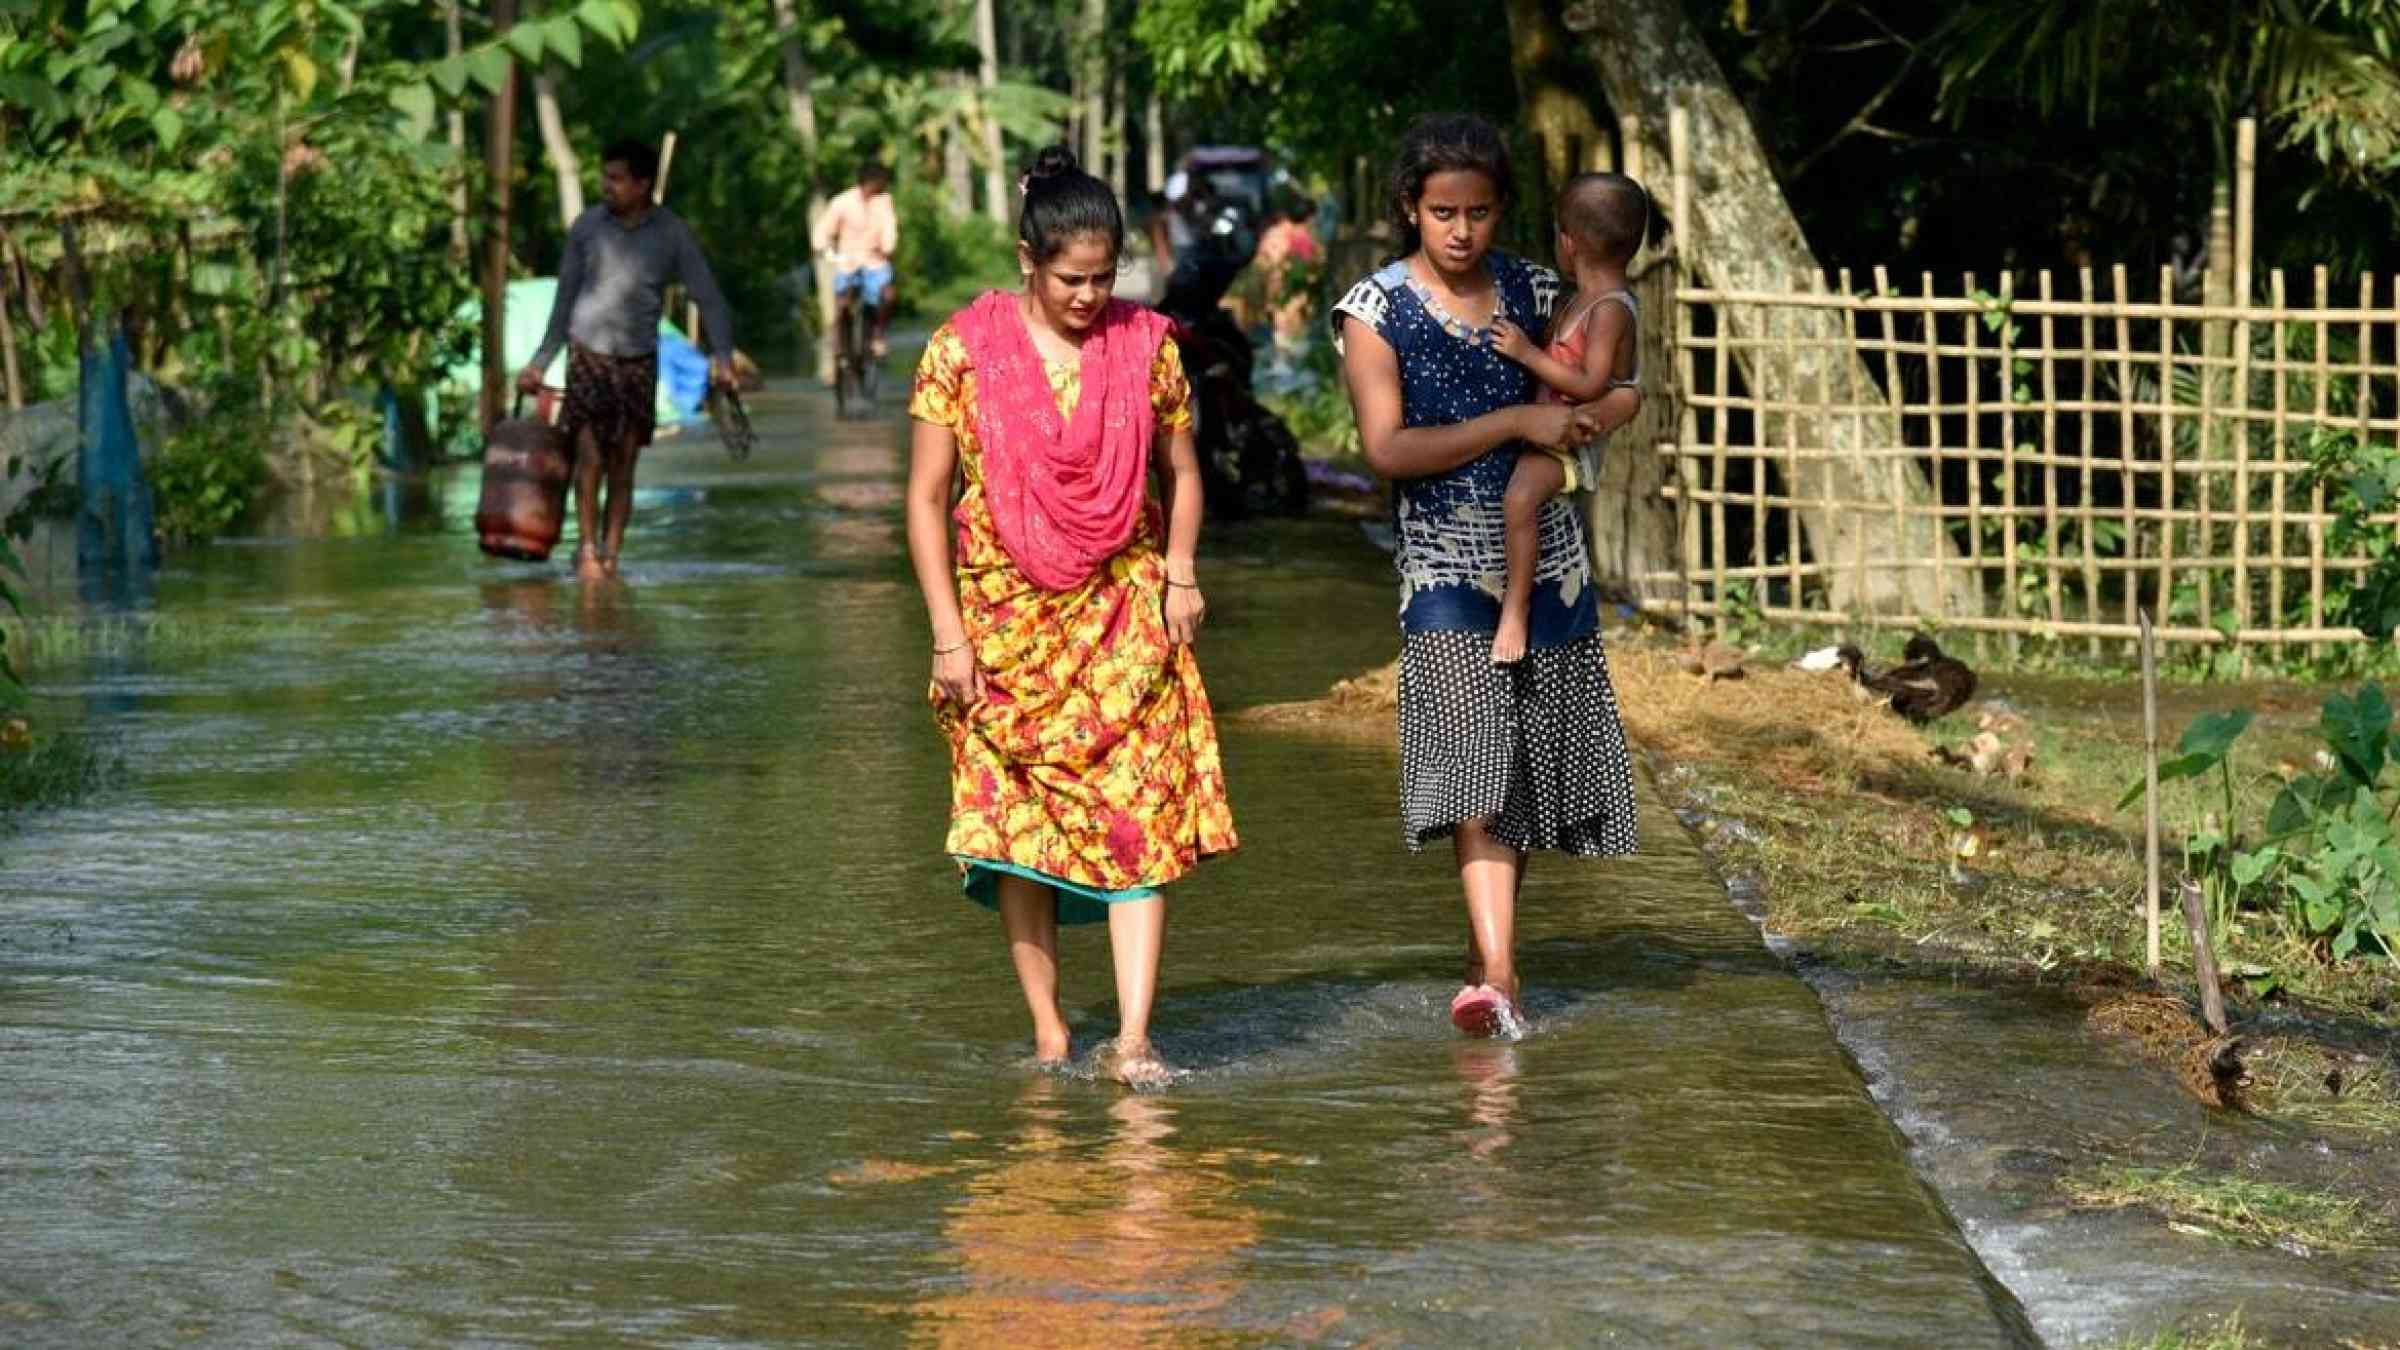 Women in Assam State, India wade through floods after heavy downpour